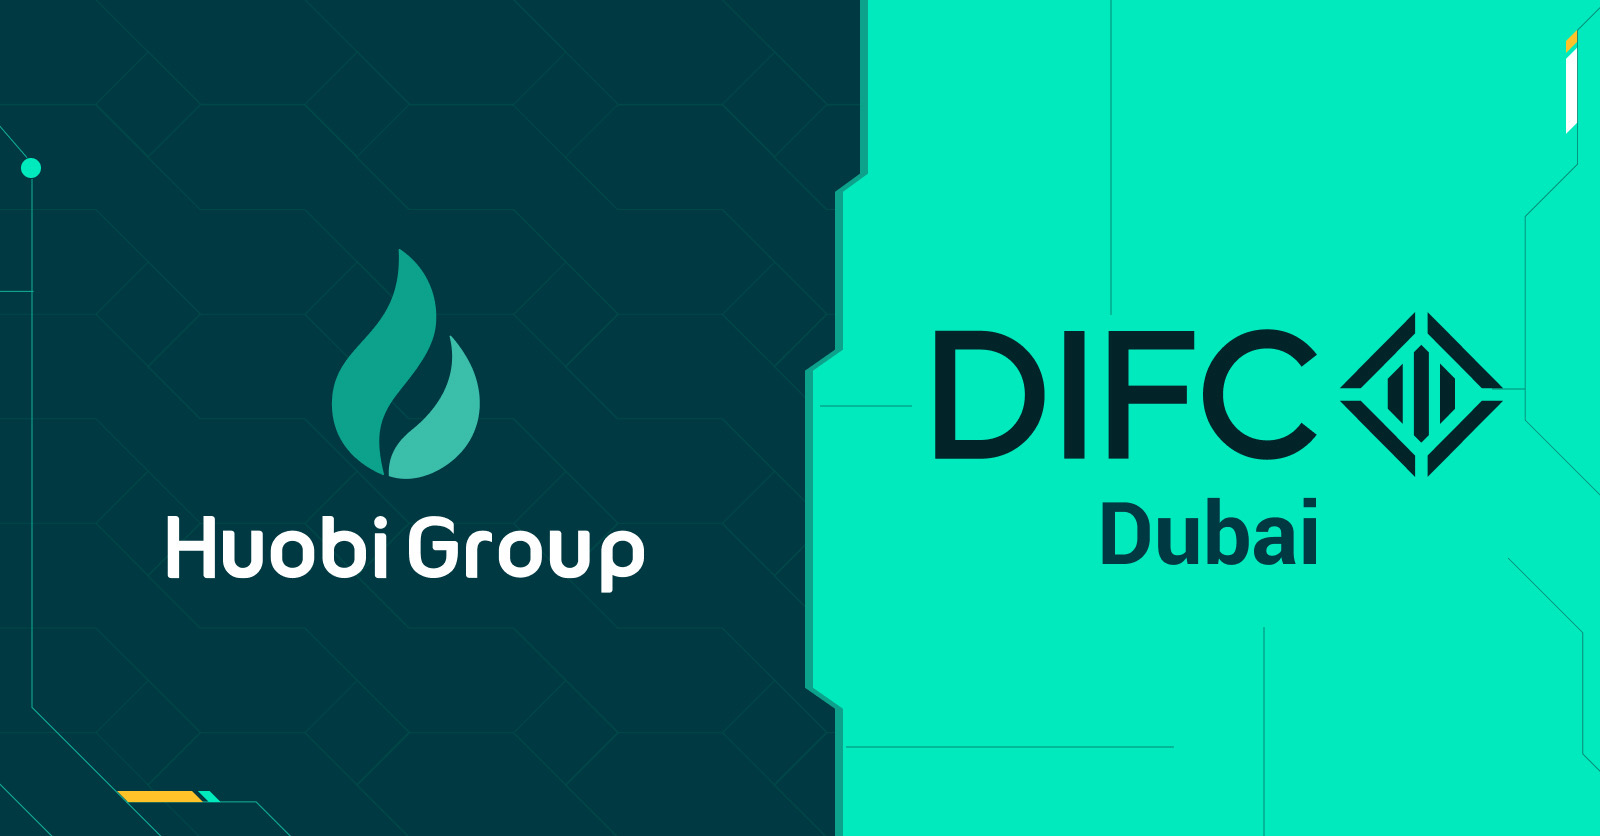 Huobi Group Secures Licenses From Dubai And New Zealand, Marking Major Milestones for Compliant Growth